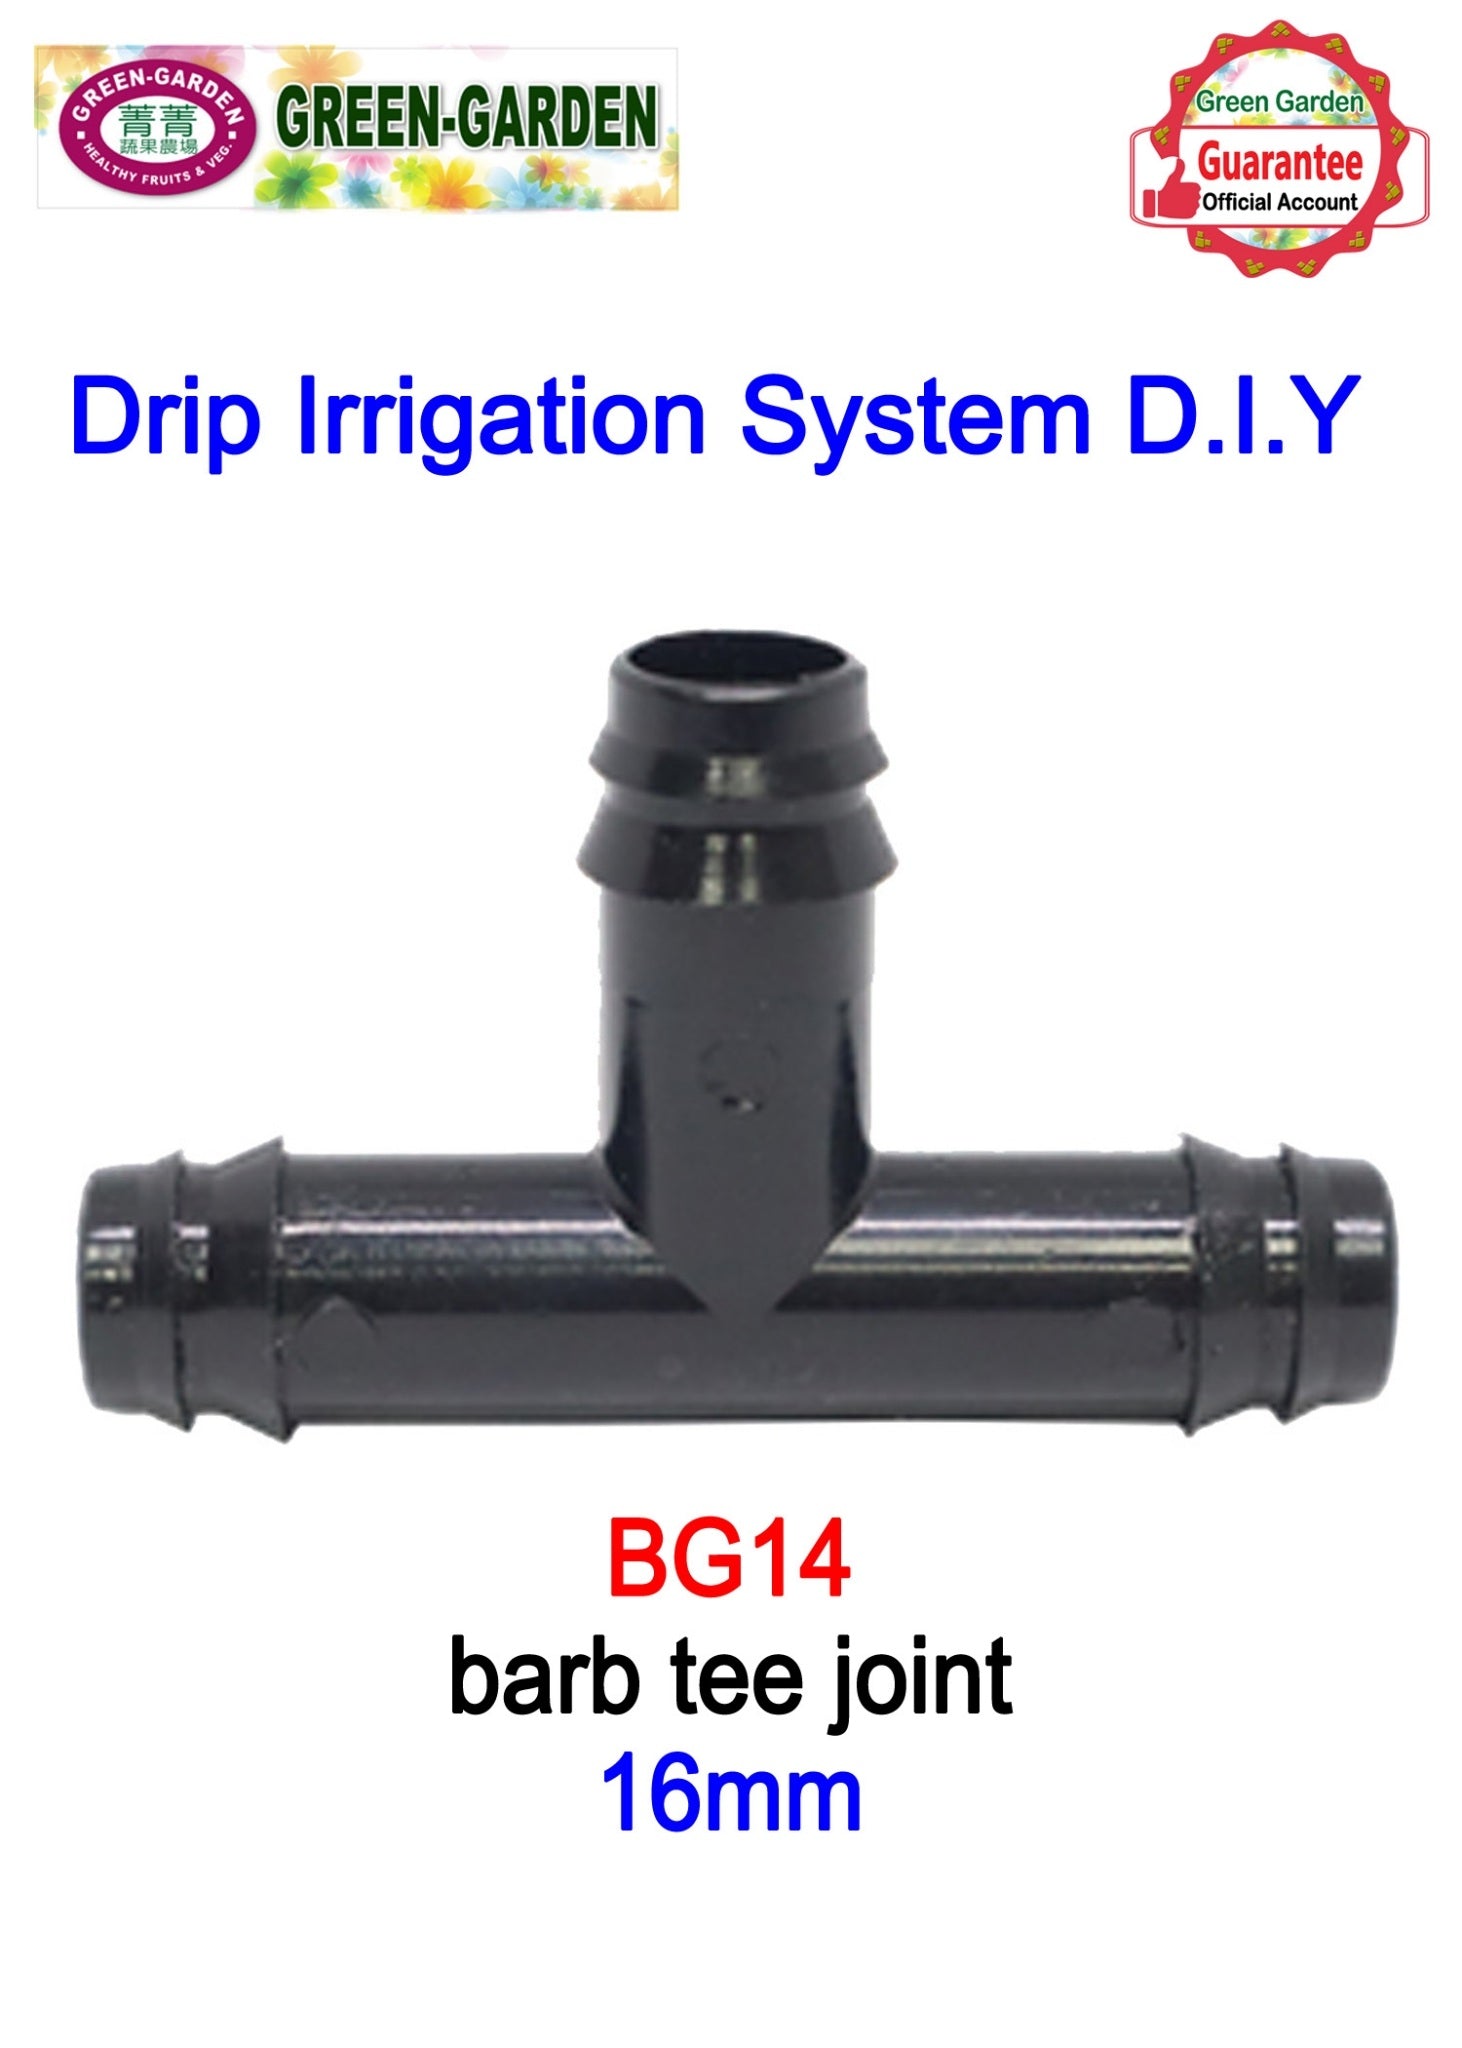 Drip Irrigation System - 16mm barbed tee connector (2pcs) BG14